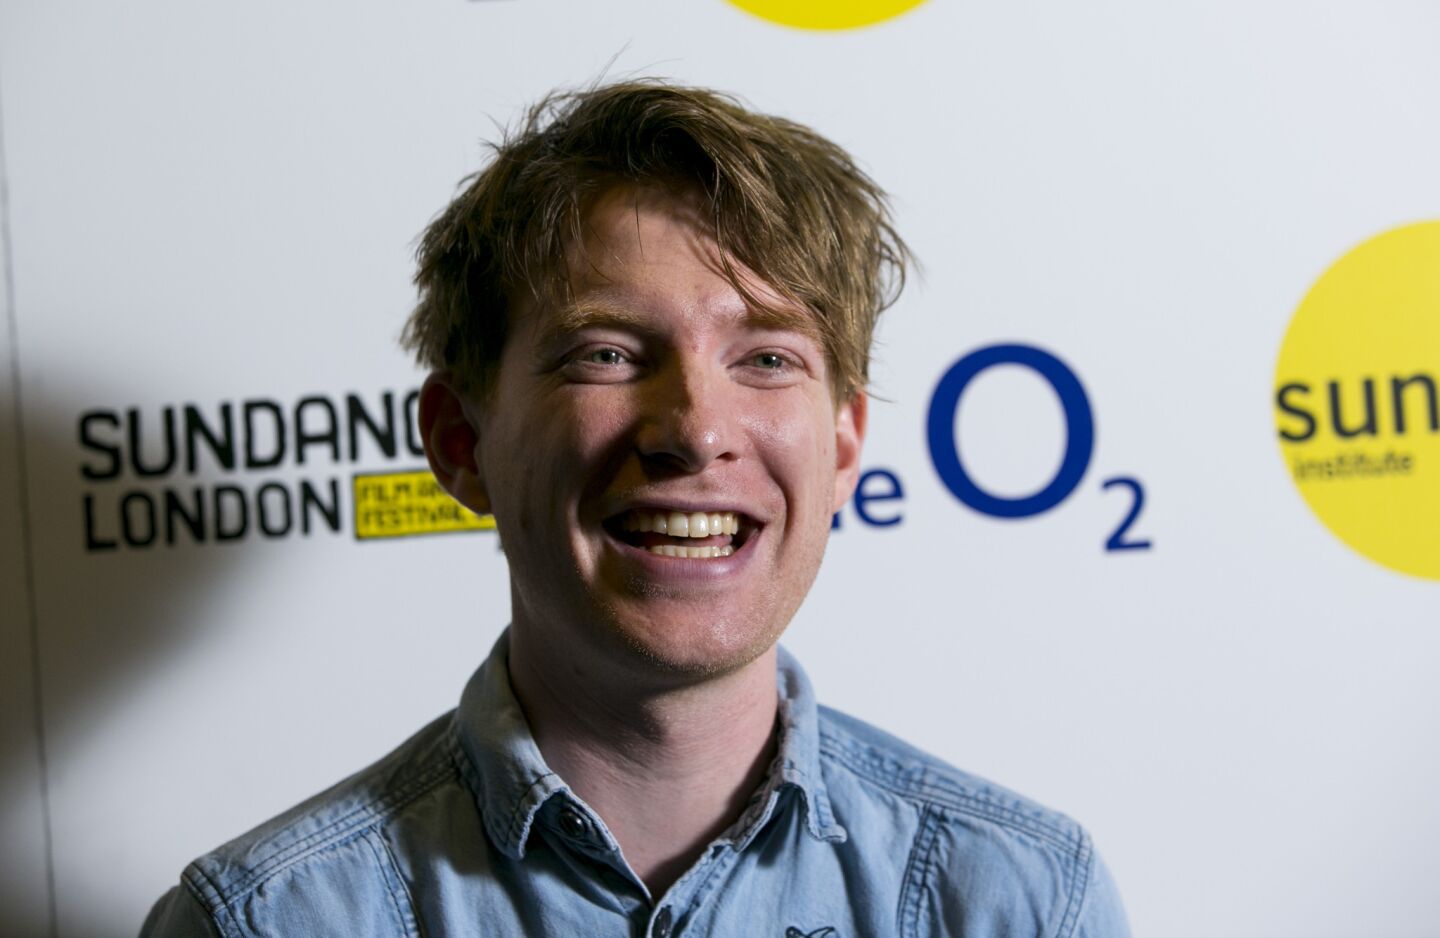 Irish actor Domhnall Gleeson, who played Bill Weasley in "Harry Potter and the Deathly Hallows."